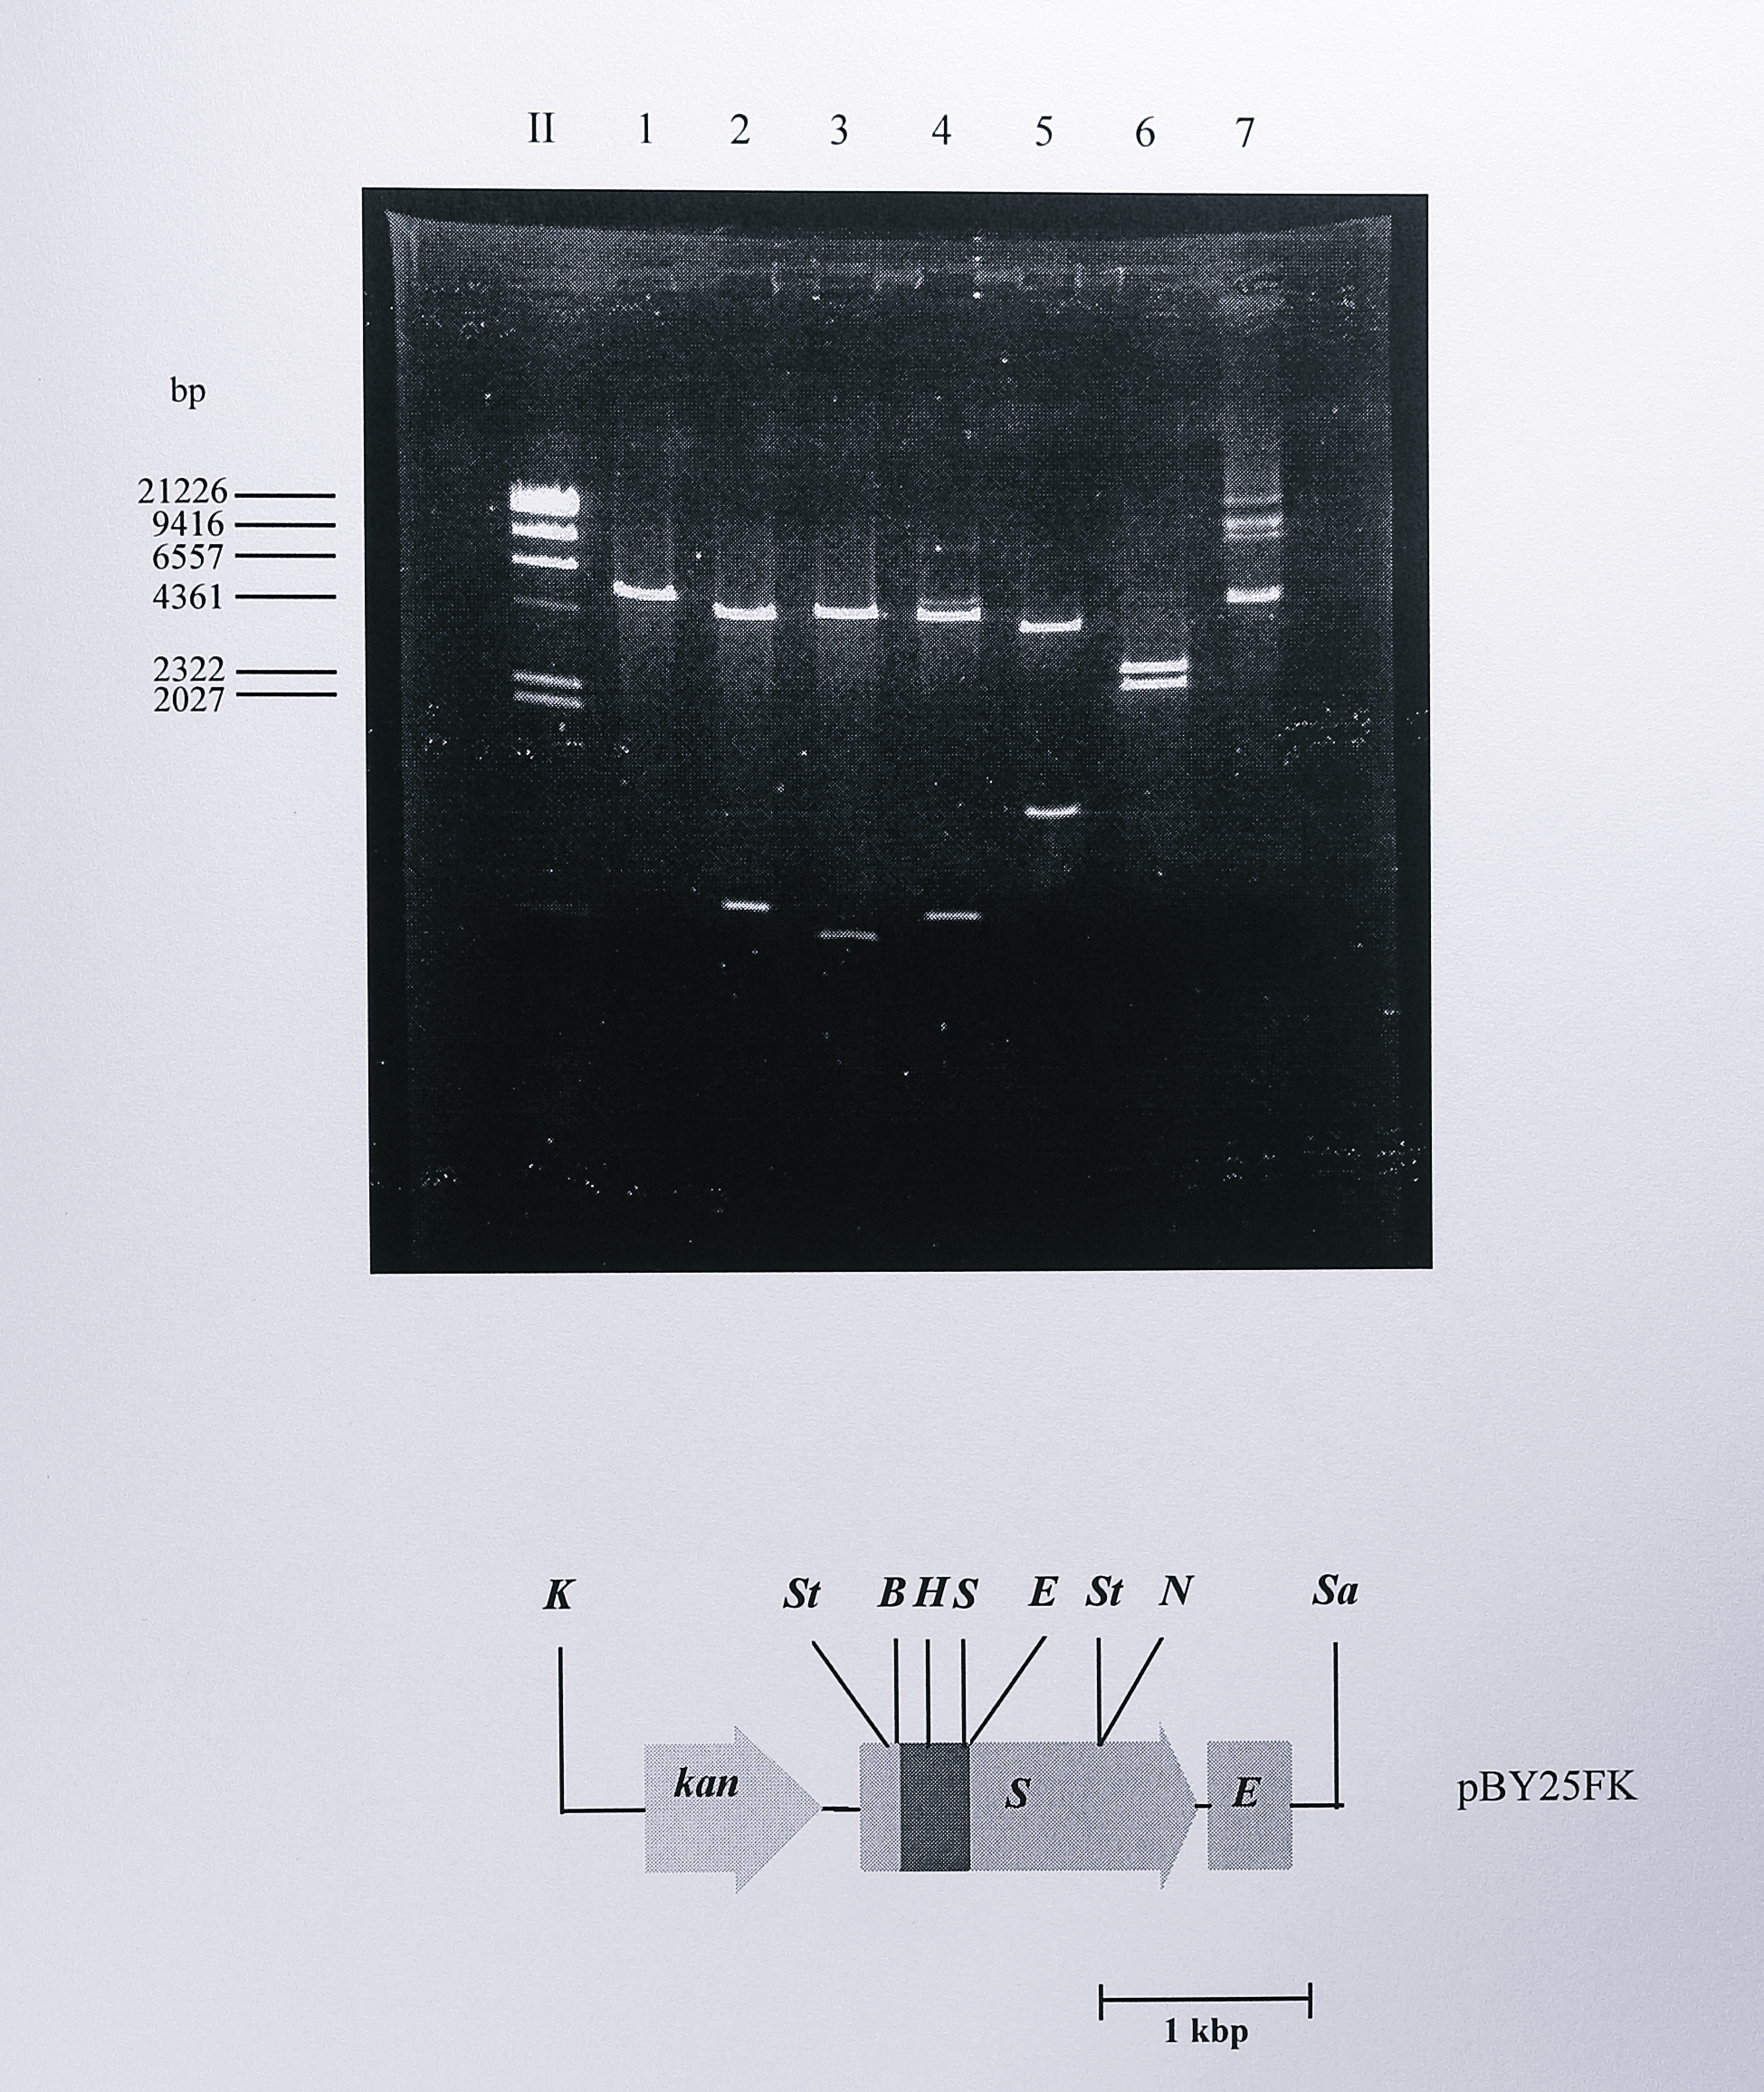 Restriction digest analysis of plasmid pBY25FK. Following ligation and transformation, plasmid DNA was isolated from the transformed cells and digested using _BamHI_ (lane 1), _EcoRI_ (lane 2), _HindIII_ (lane 3), _SalI_ (lane 4), _StyI_ (lane 5), _KpnI_ - _SacI_ (lane 6) and _NruI_ (lane 7). Plasmid pBY25F from which pBY25FK was derived had previously been screened for the presence of the mutagenic _MluI_ site. The pBluescript (II) vector contained one additional site for _EcoRI_, _HindIII_ and _SalI_. Analysis of the digests showed that the construct was correct as shown in the diagram below the gel. Enzymes: B, _BamHI_, E, _EcoRI_, H, _HindIII_, K, _KpnI_, N, _NruI_, S, _SalI_, Sa, _SacI_, St, _StyI_. The lane labelled II contained DNA size standards, some of which are indicated at the left of the gel.